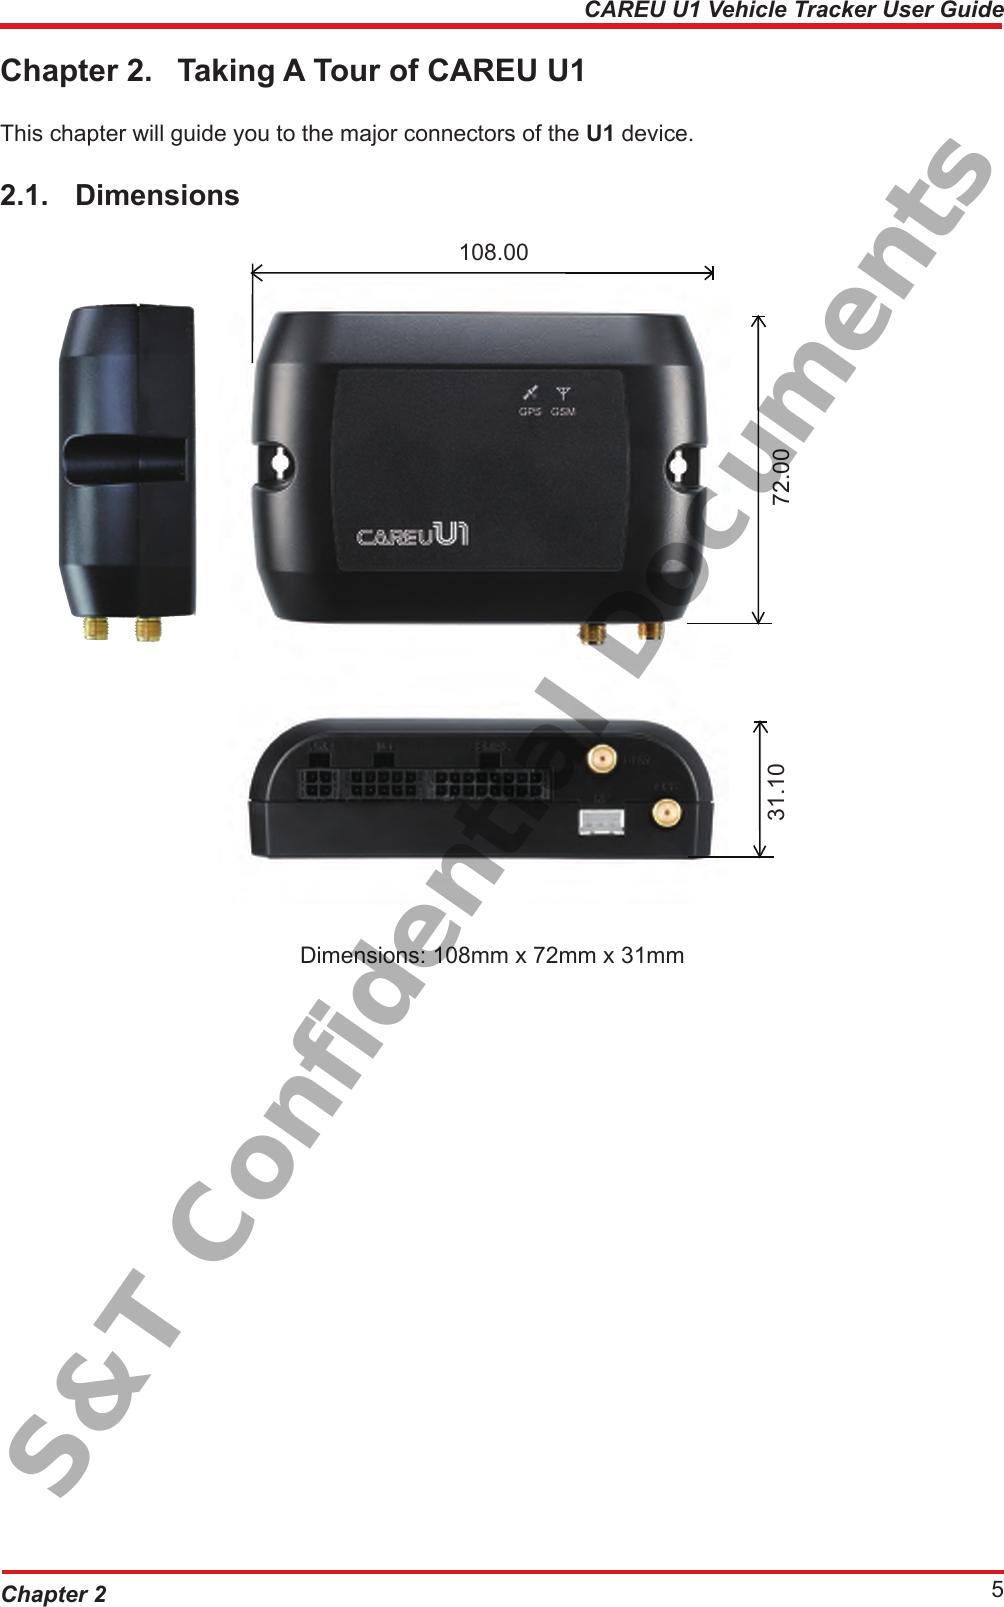 Chapter 2 5CAREU U1 Vehicle Tracker User GuideChapter 2.  Taking A Tour of CAREU U1This chapter will guide you to the major connectors of the U1 device.2.1.  Dimensions        Dimensions: 108mm x 72mm x 31mm72.0031.10108.00S&amp;T Confidential Documents